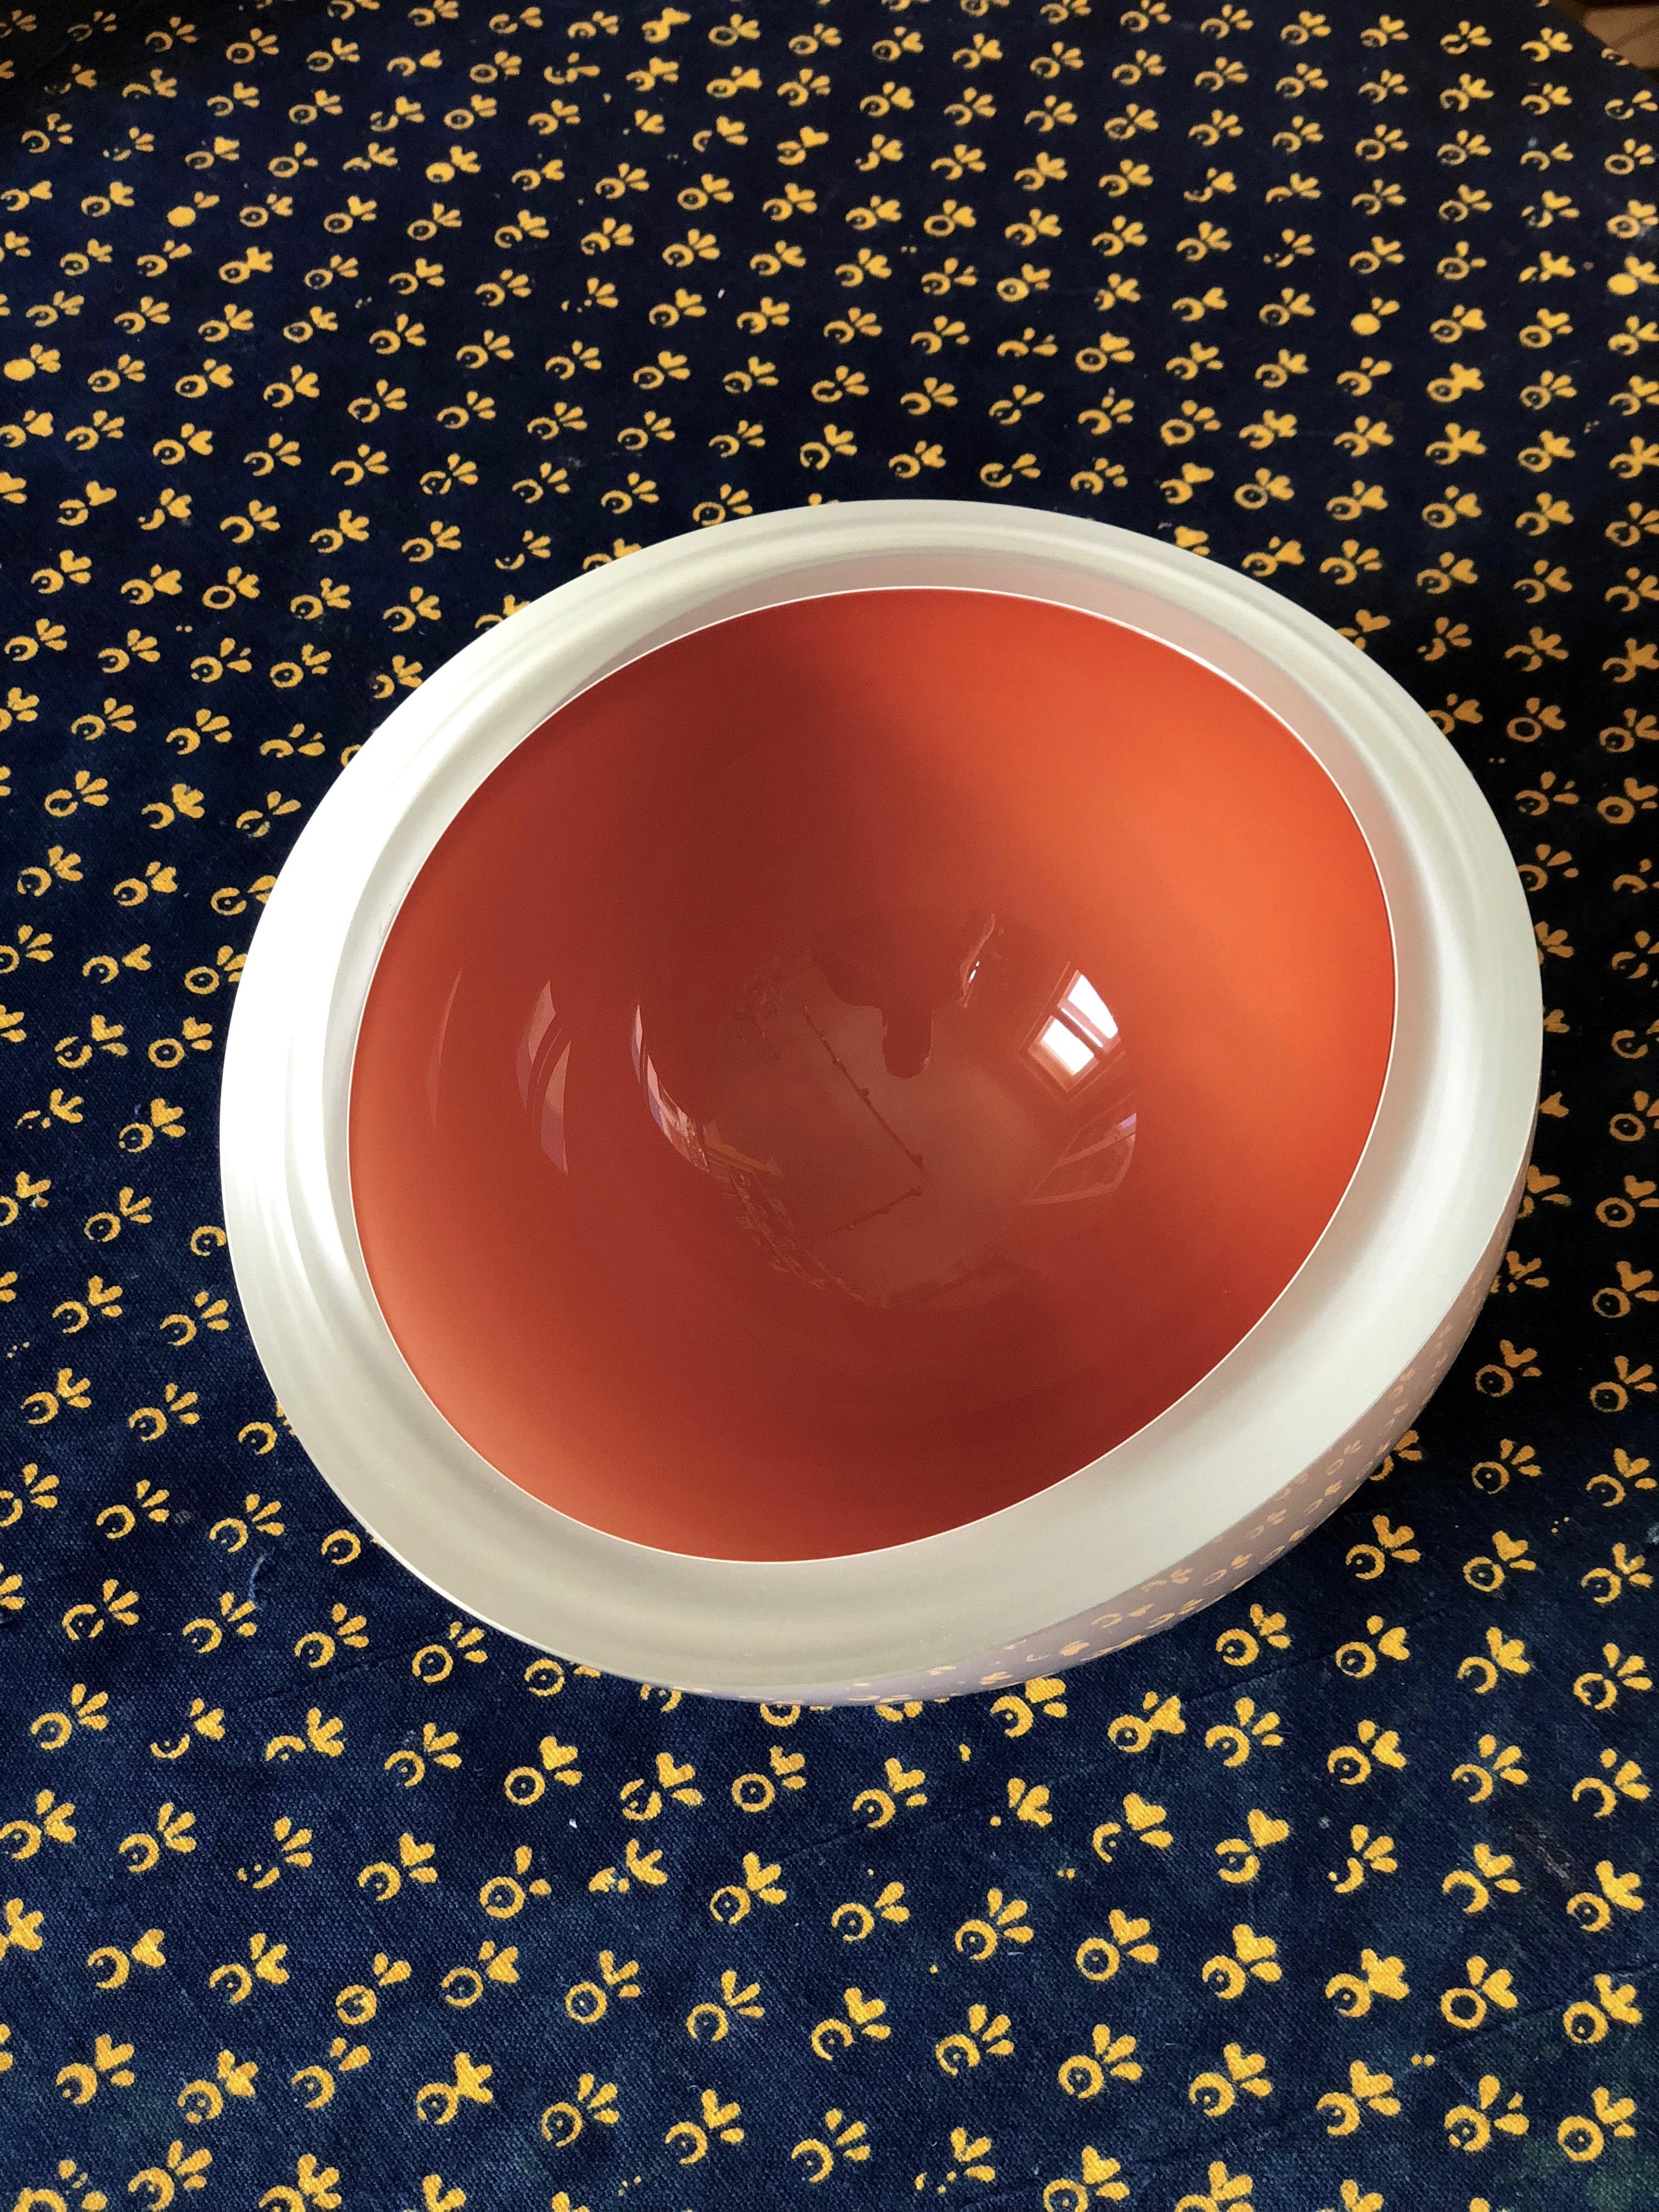 Art Glass Contemporary Studio Glass Bowl in Coral Color, Made in the Czech Republic, 2010 For Sale